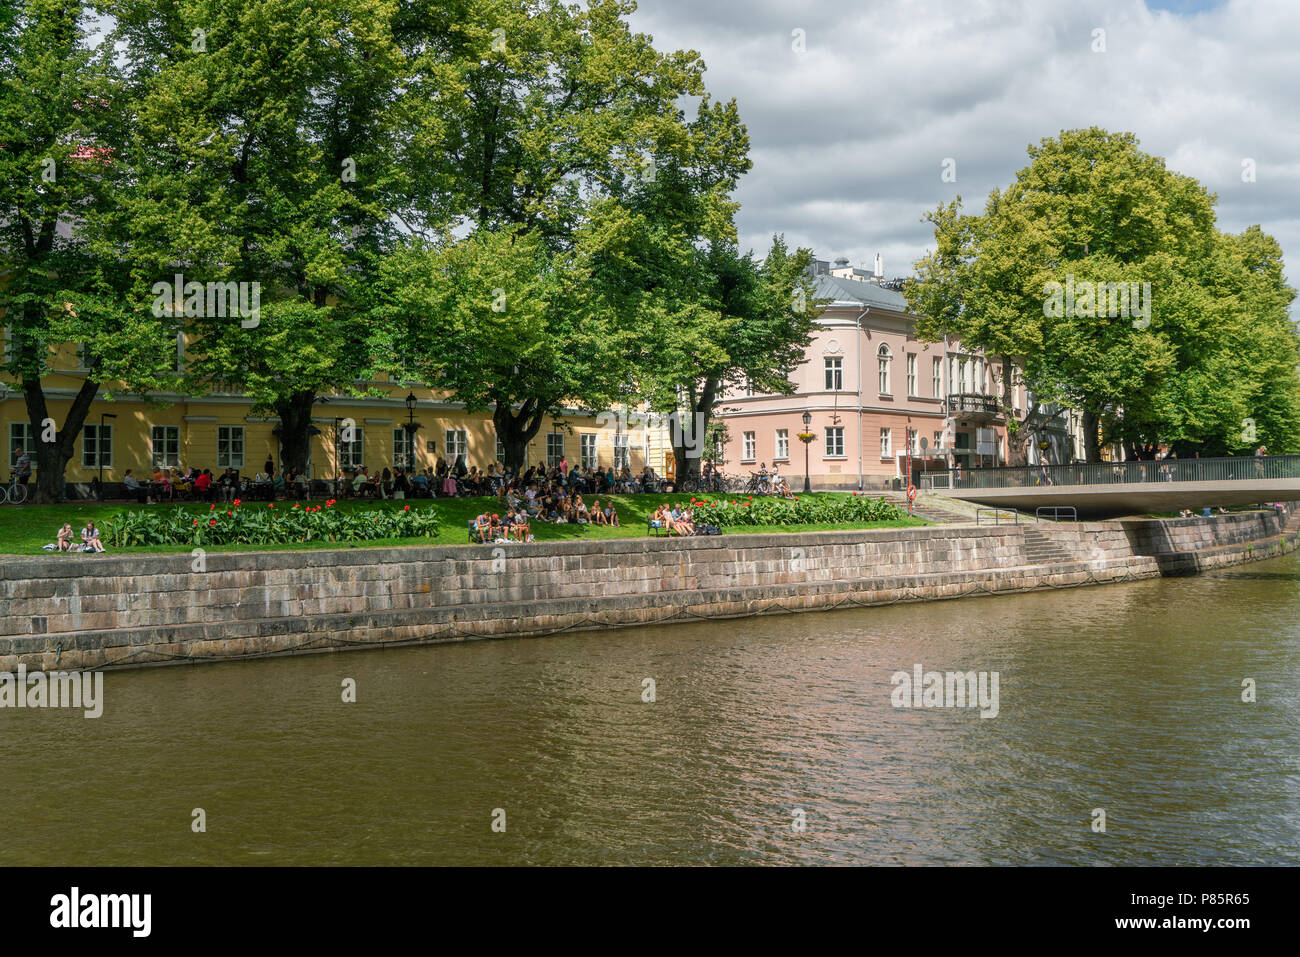 TURKU, FINLAND - 8/7/2018: People enjoying summer day by the Aura river in the old town Stock Photo